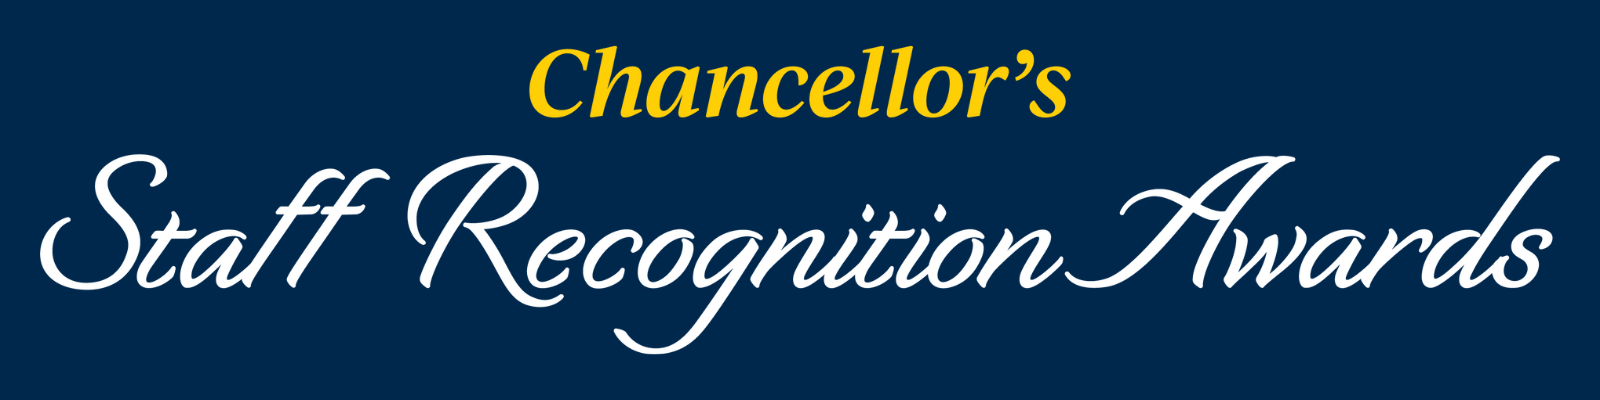 Chancellor's Staff Recognition Awards